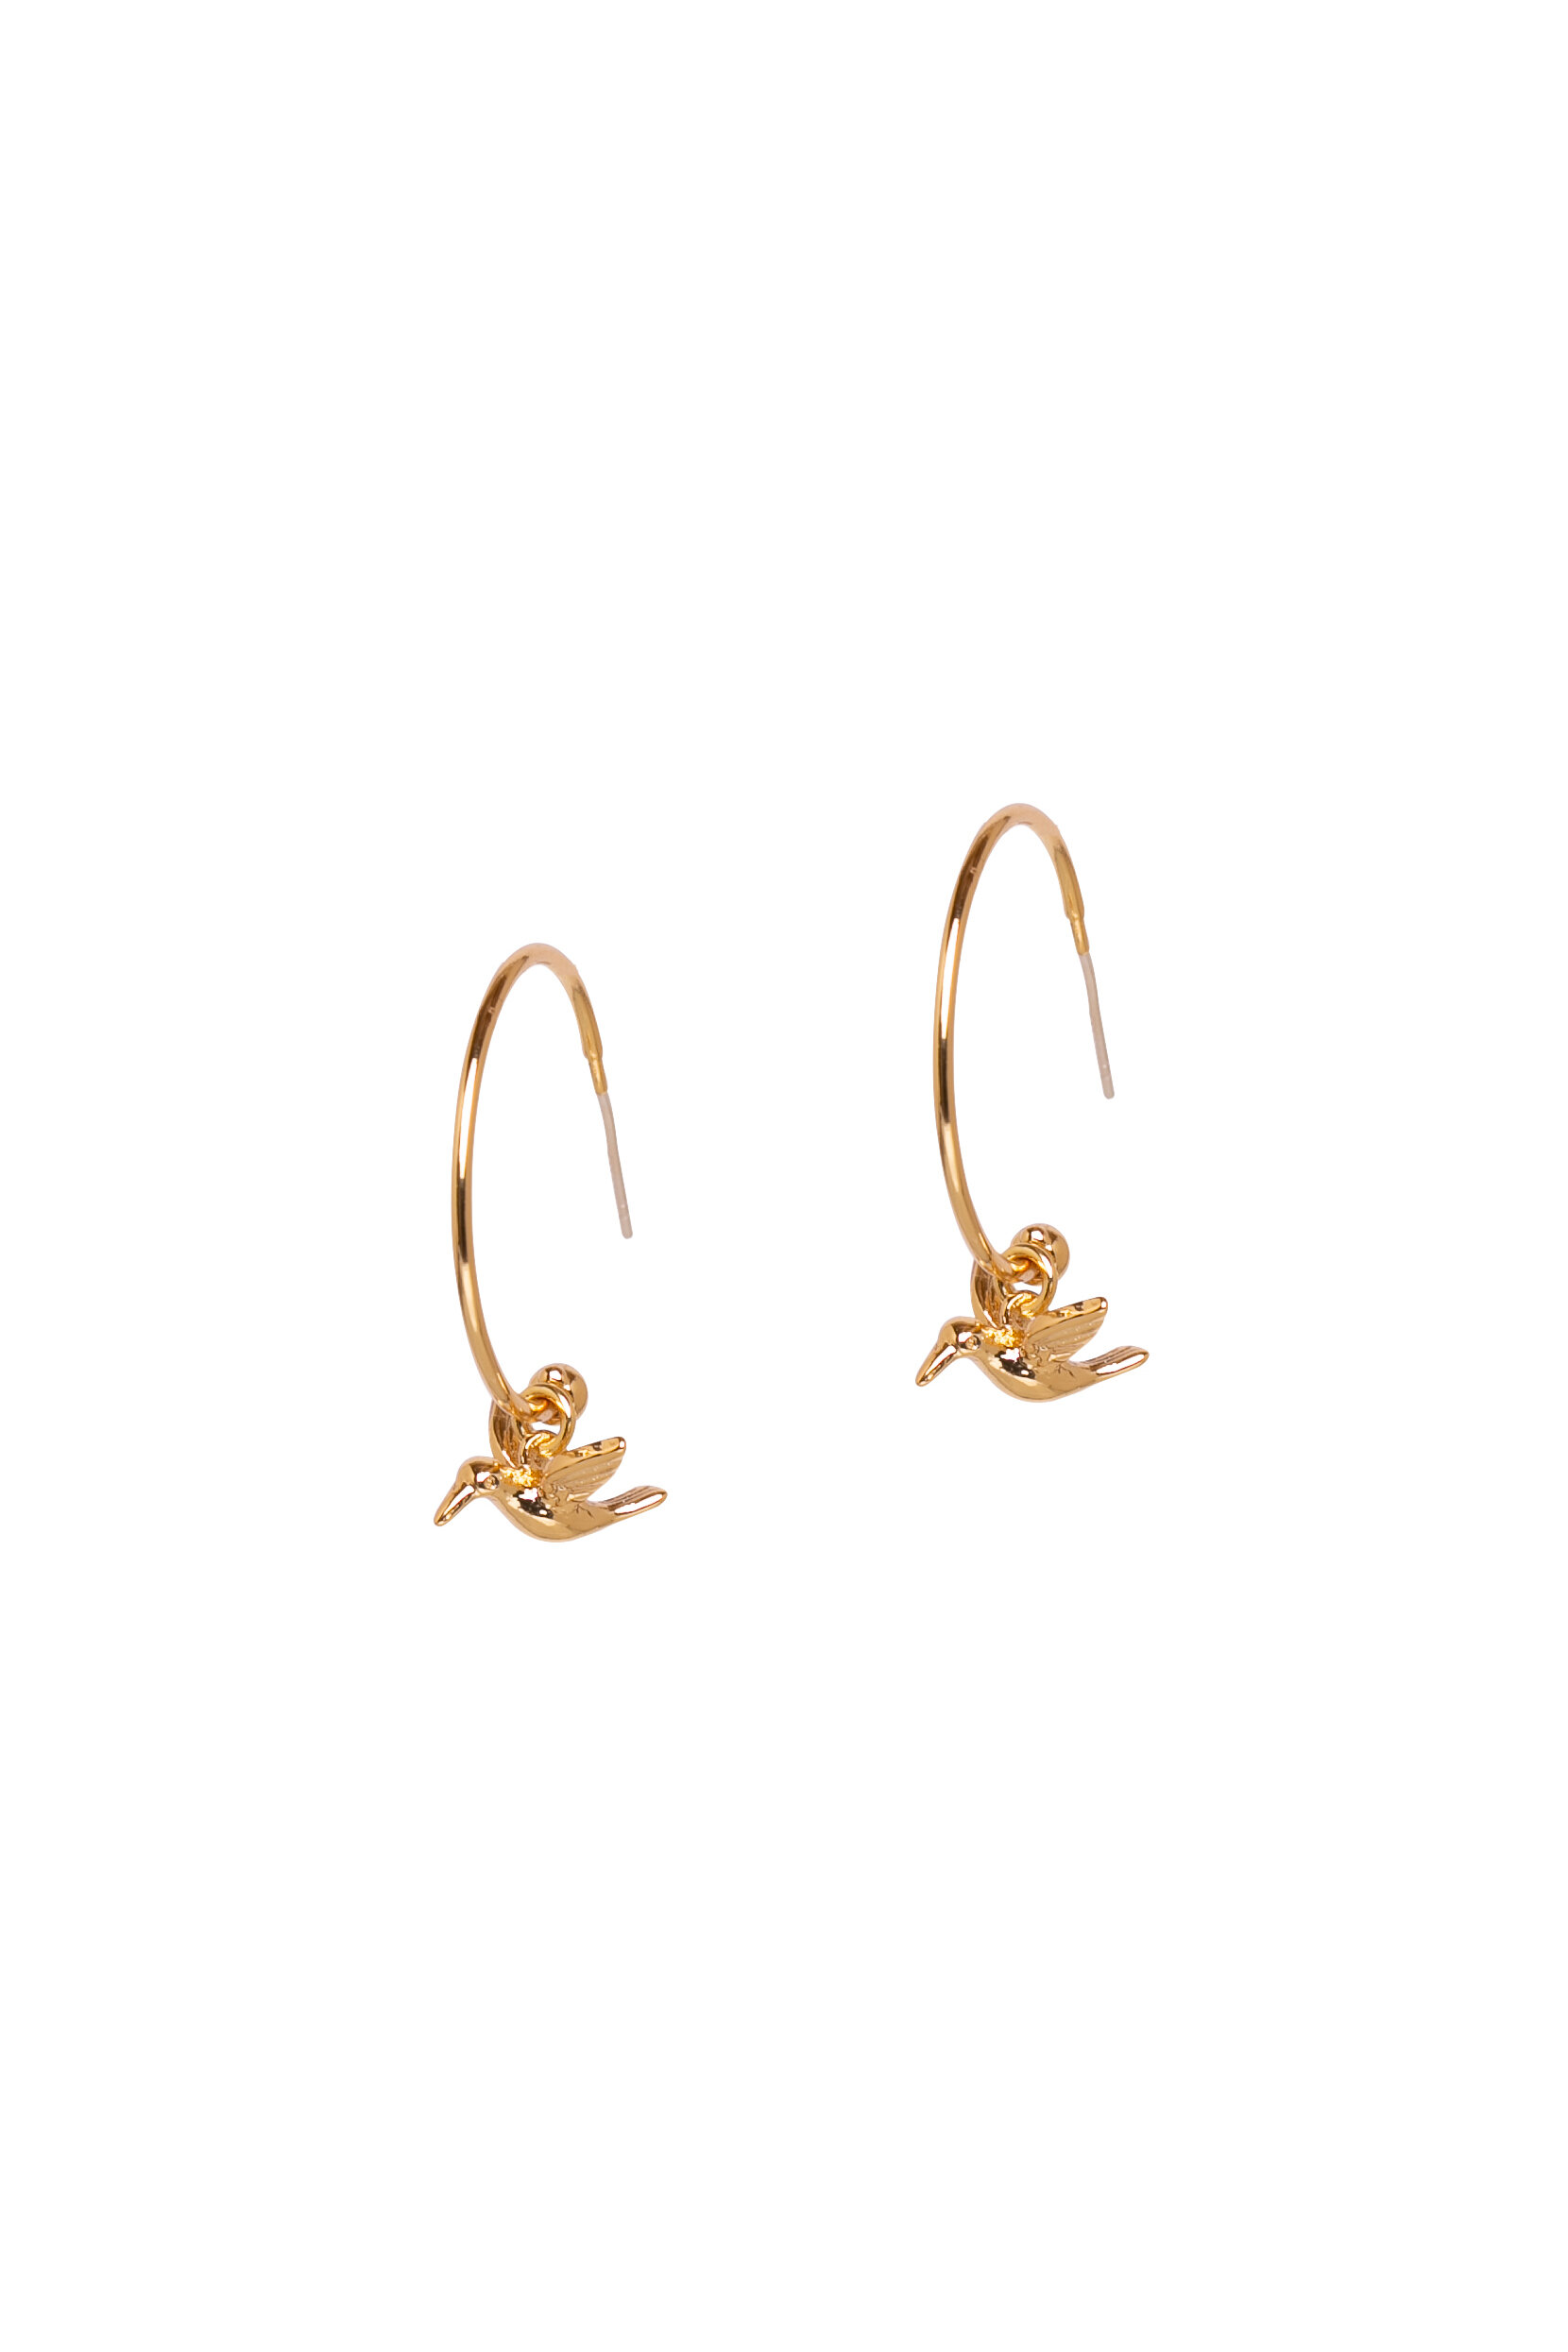 Small (20mm) Gold Plated Hoops with hummingbird charm.jpg